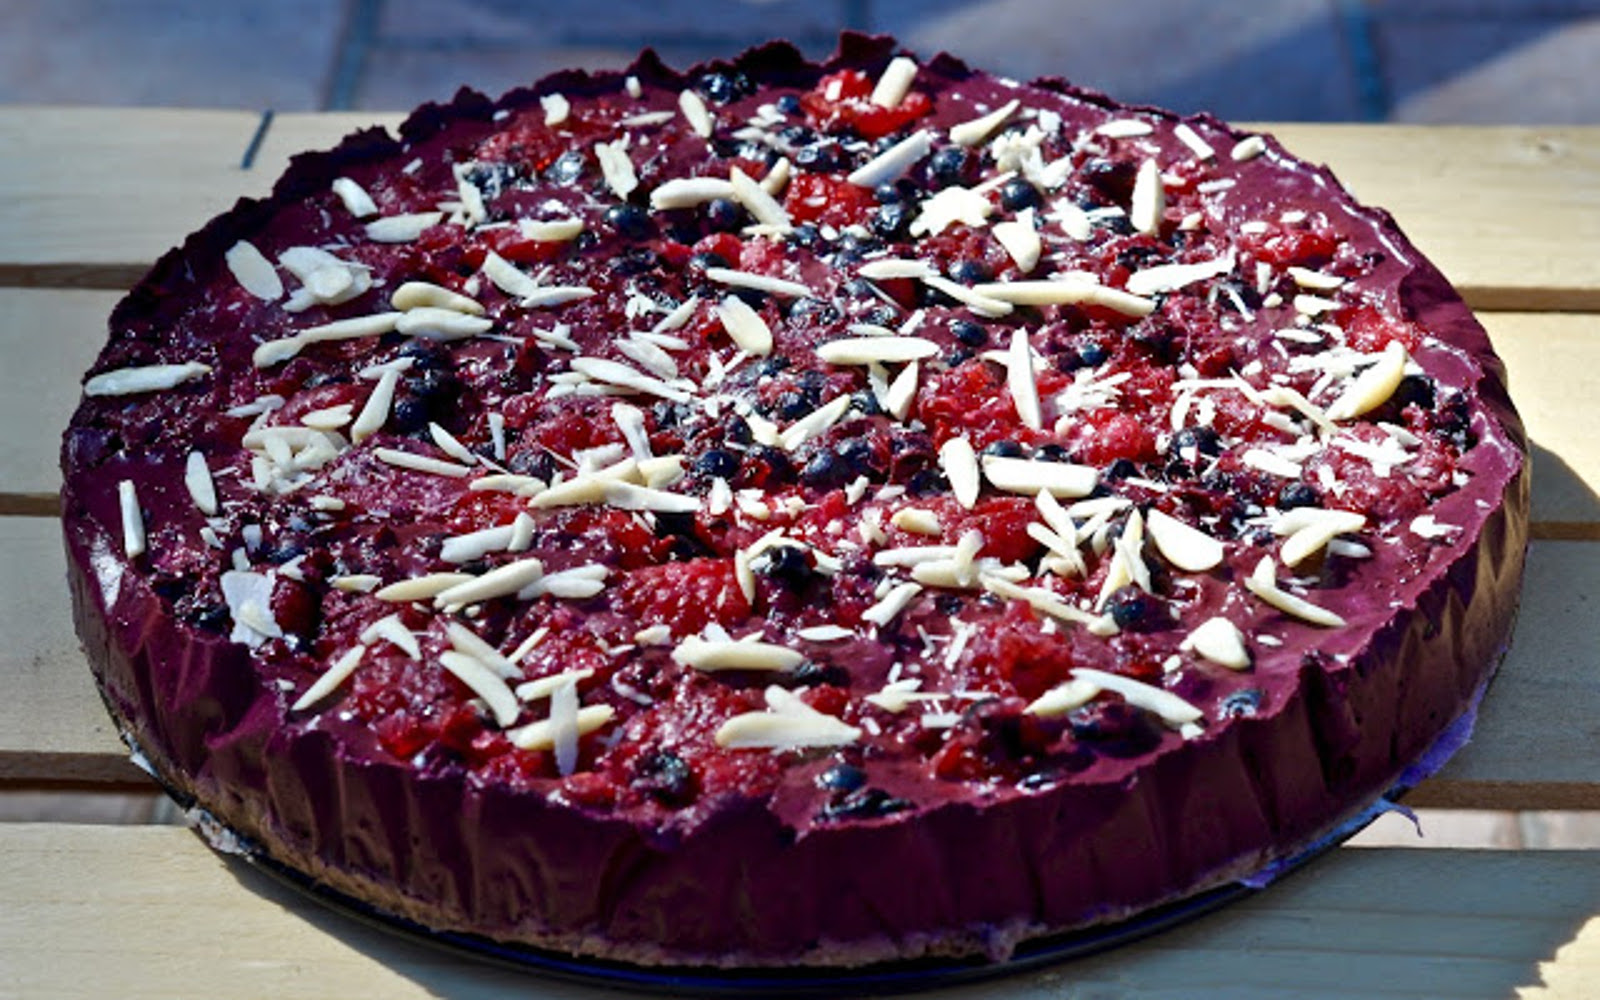 Vegan Gluten-Free Wild Blueberry and Raspberry Pie topped with coconut